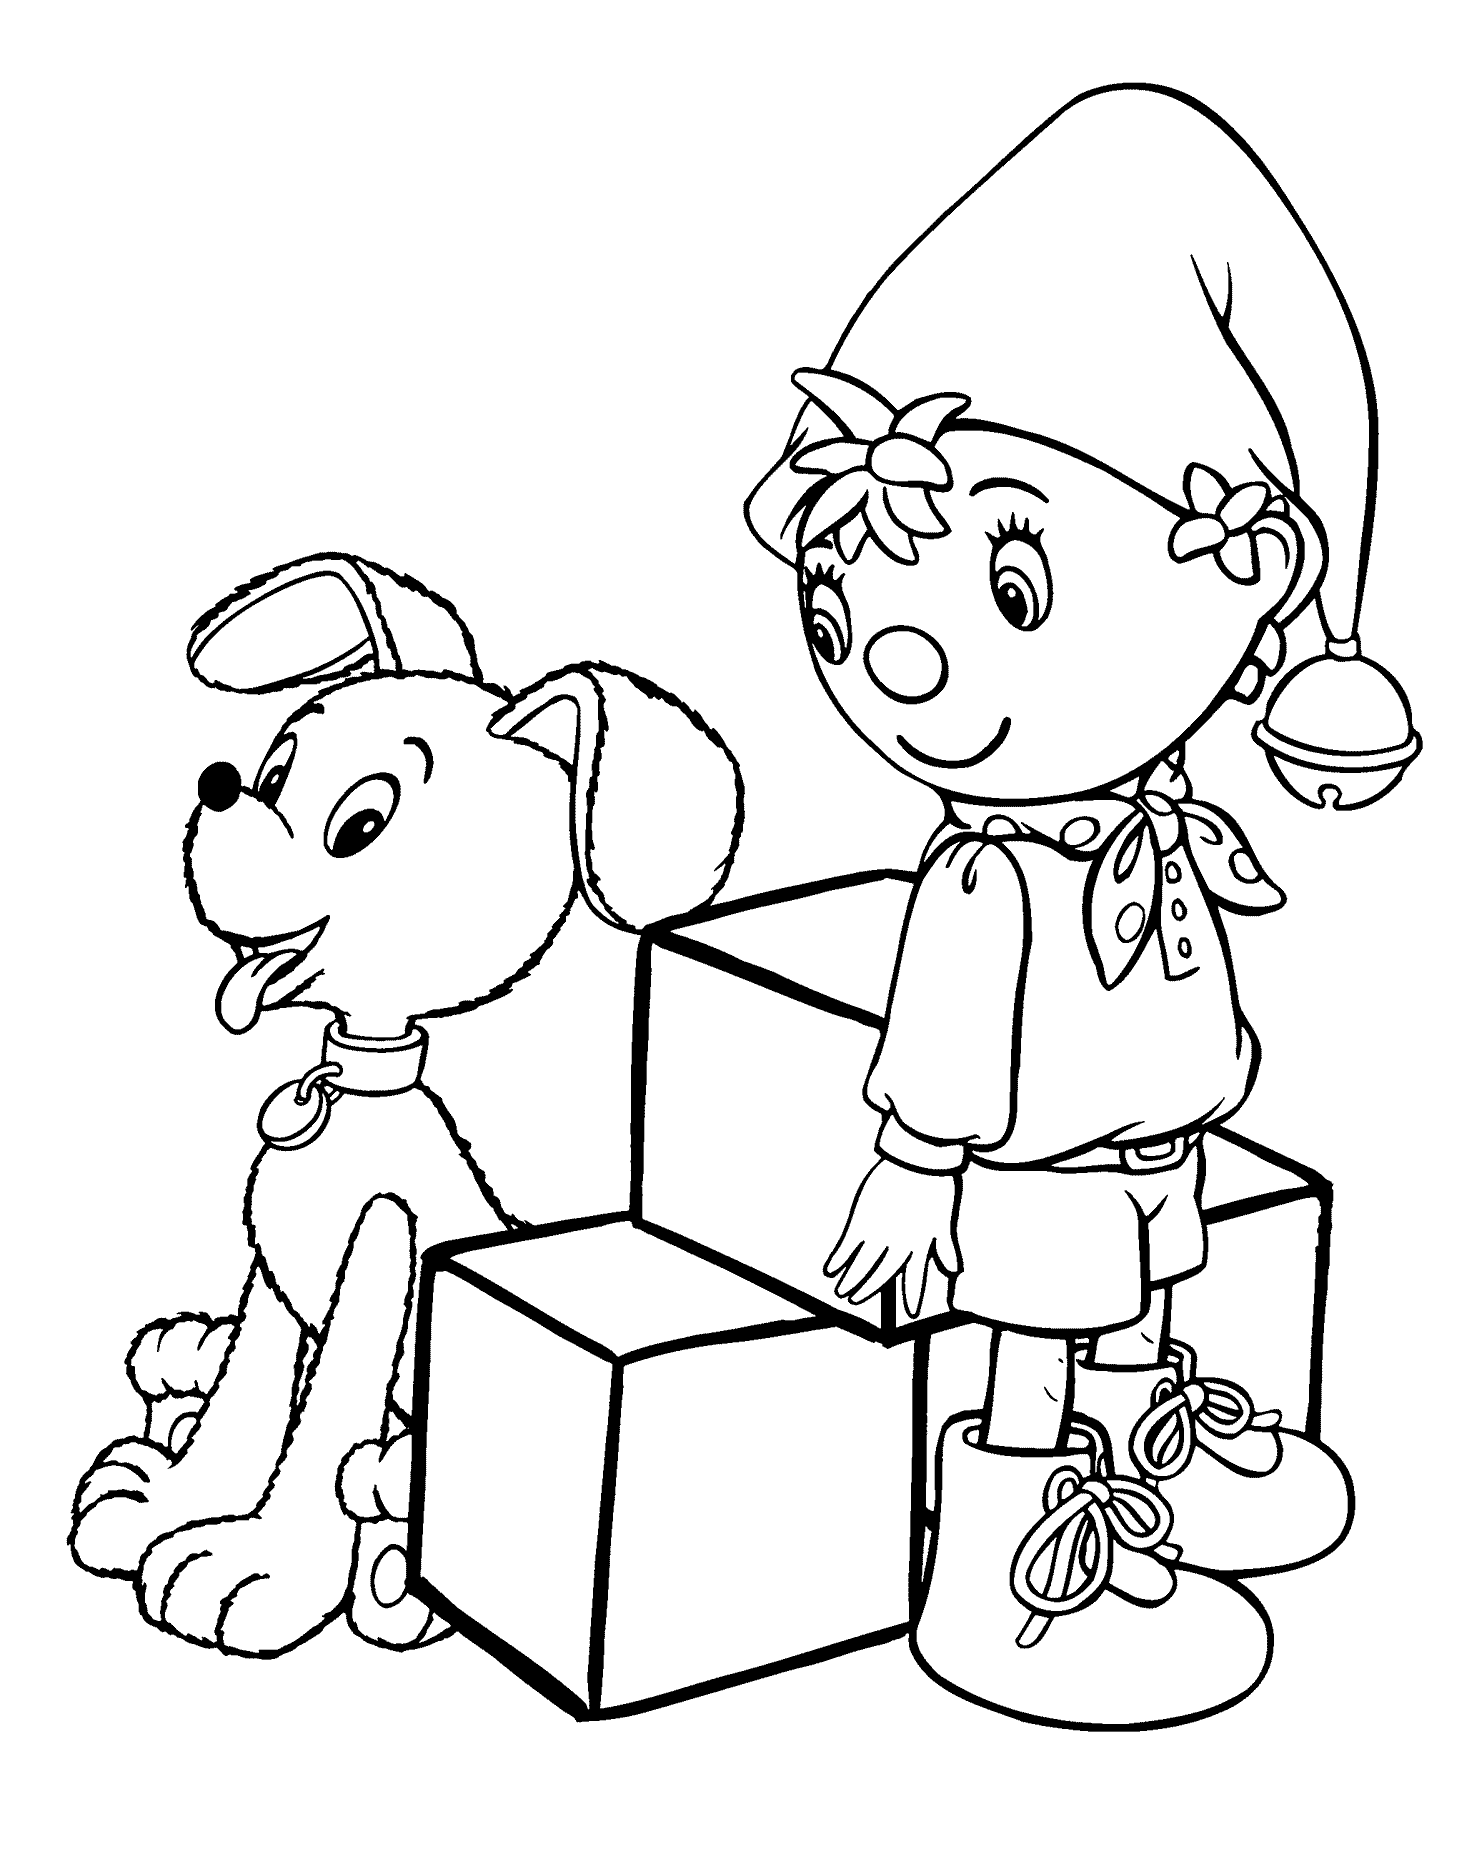 Coloring pages for kids, Coloring pages and Coloring